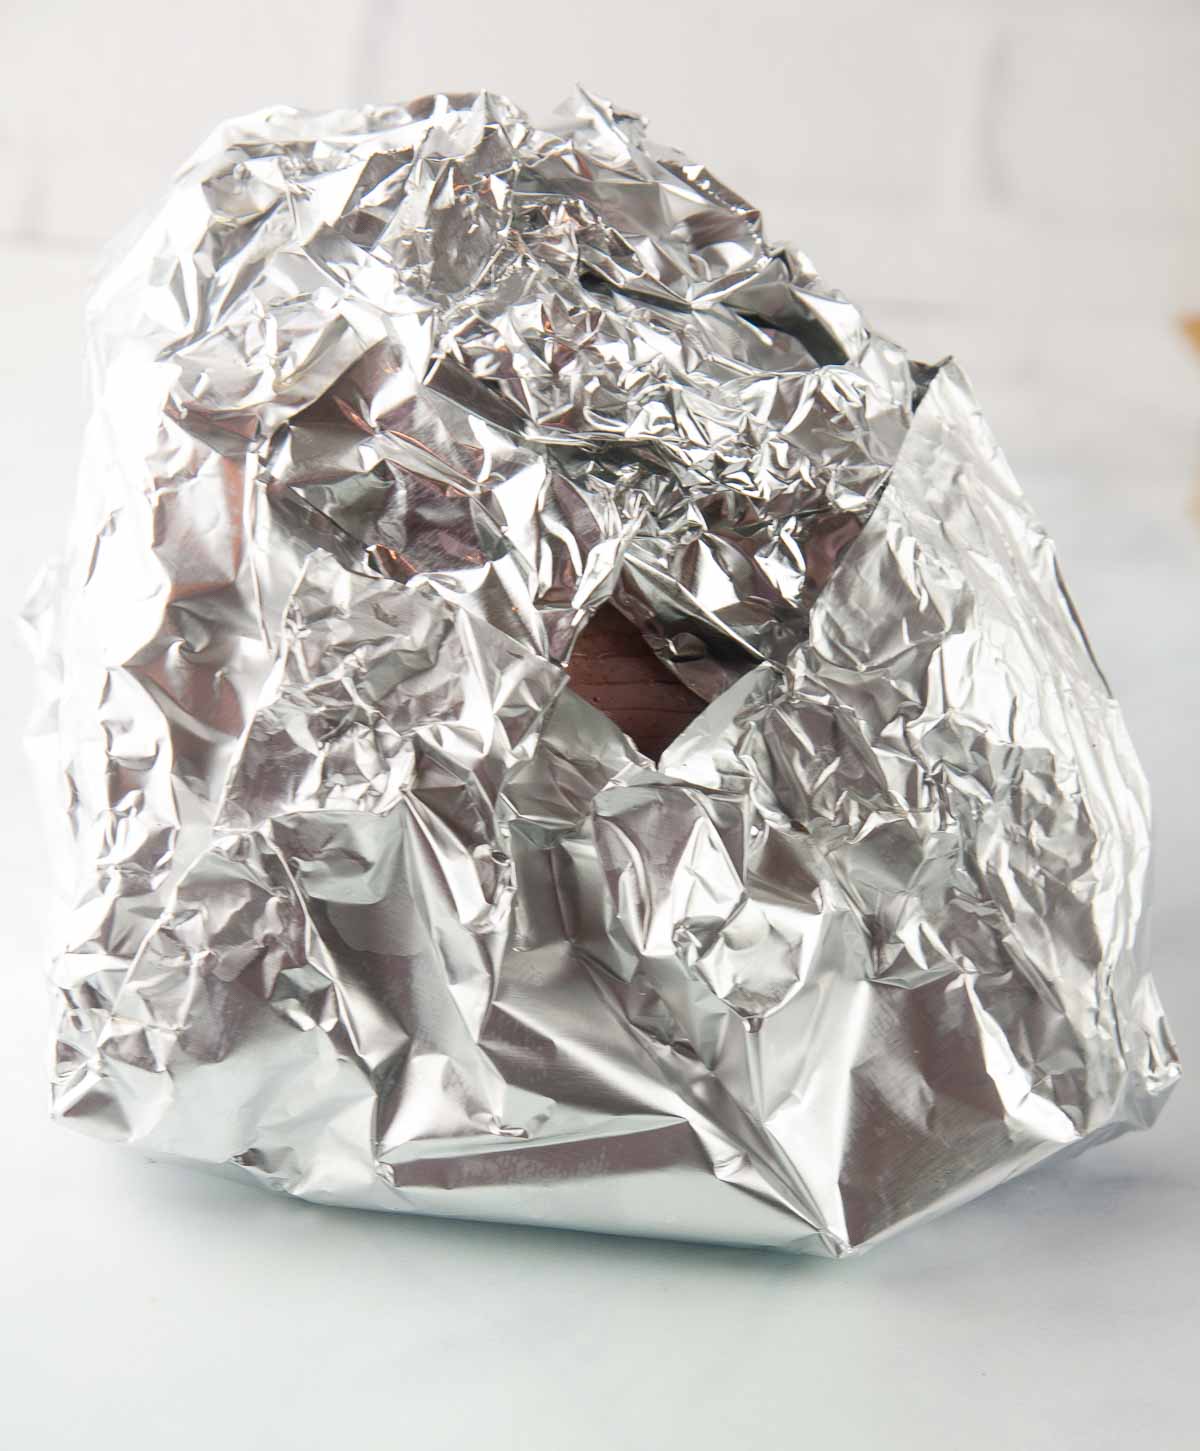 Wrap the ham tightly with foil.